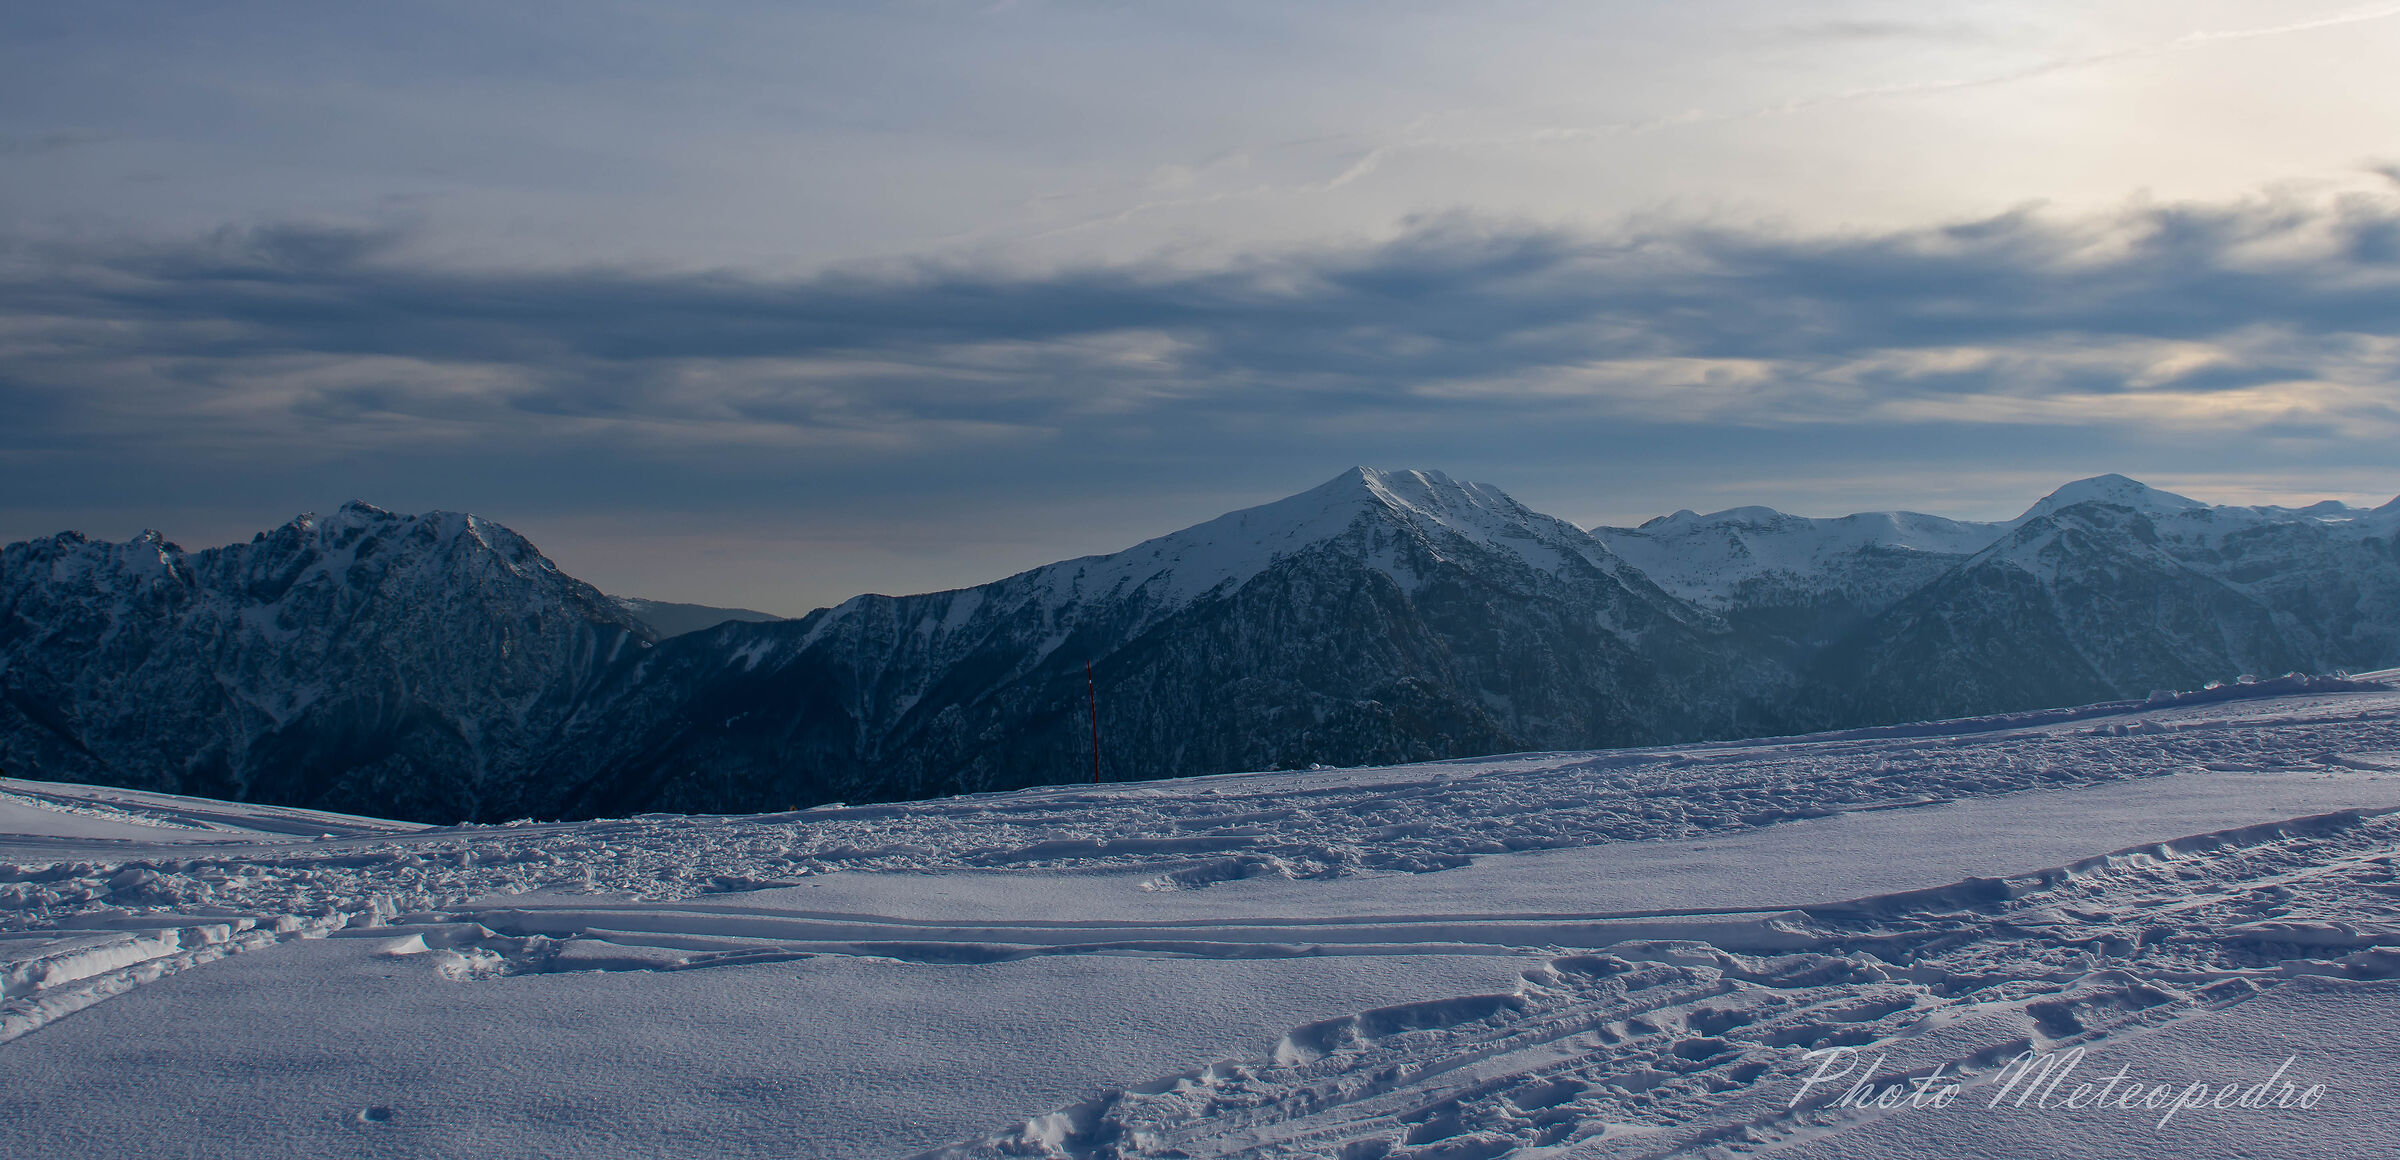 Winter overview, from the San Marco pass...